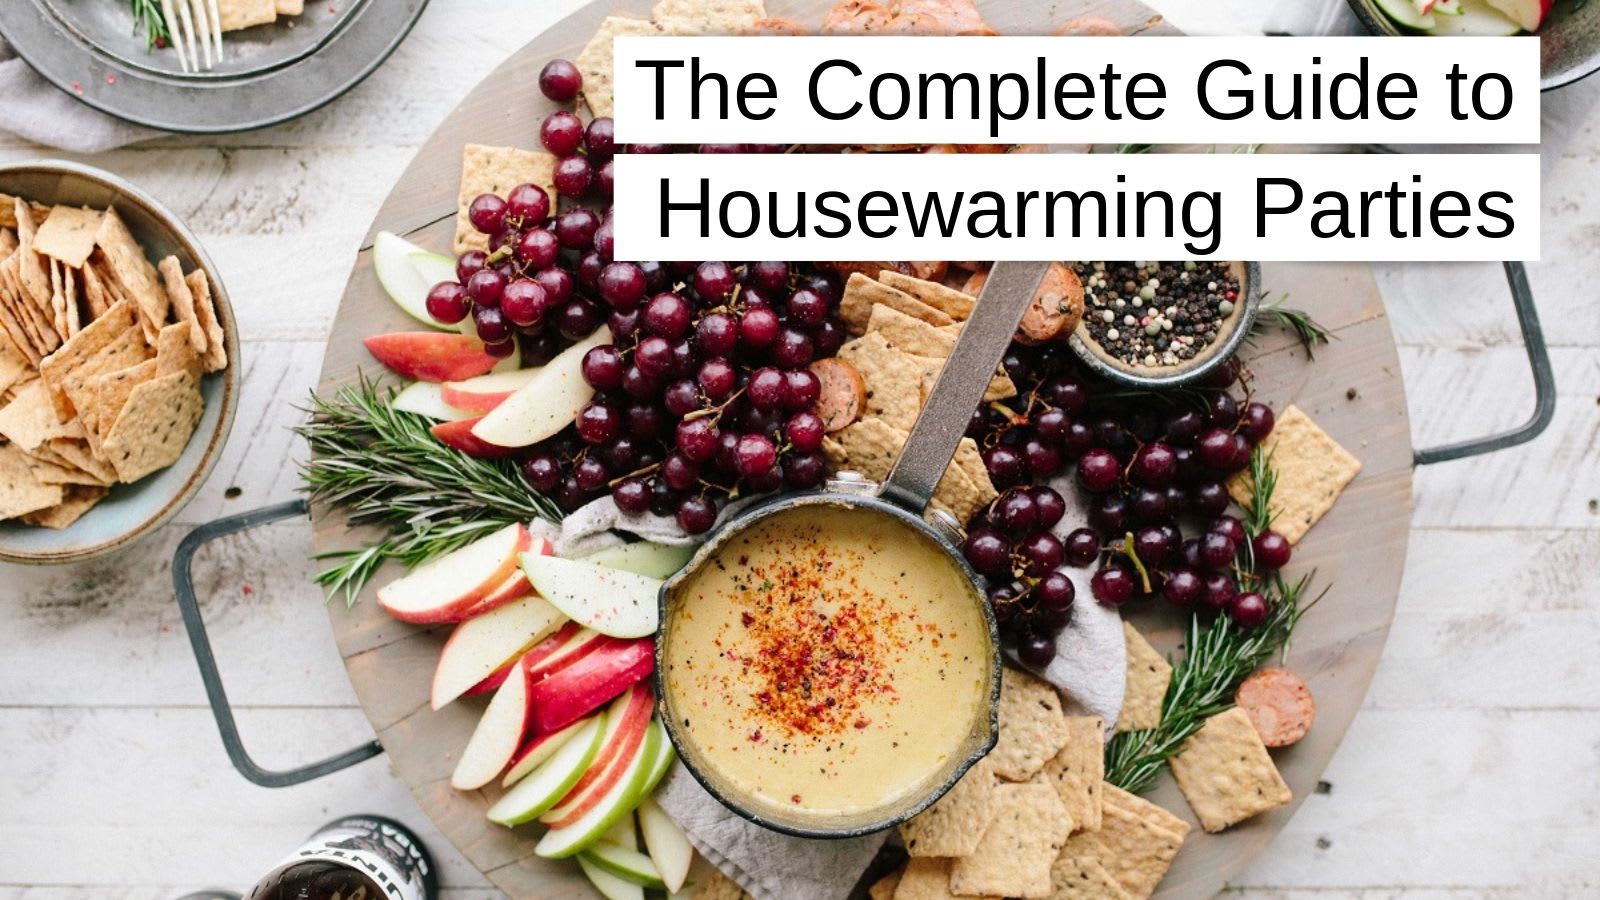 How to Plan a Successful Housewarming Party